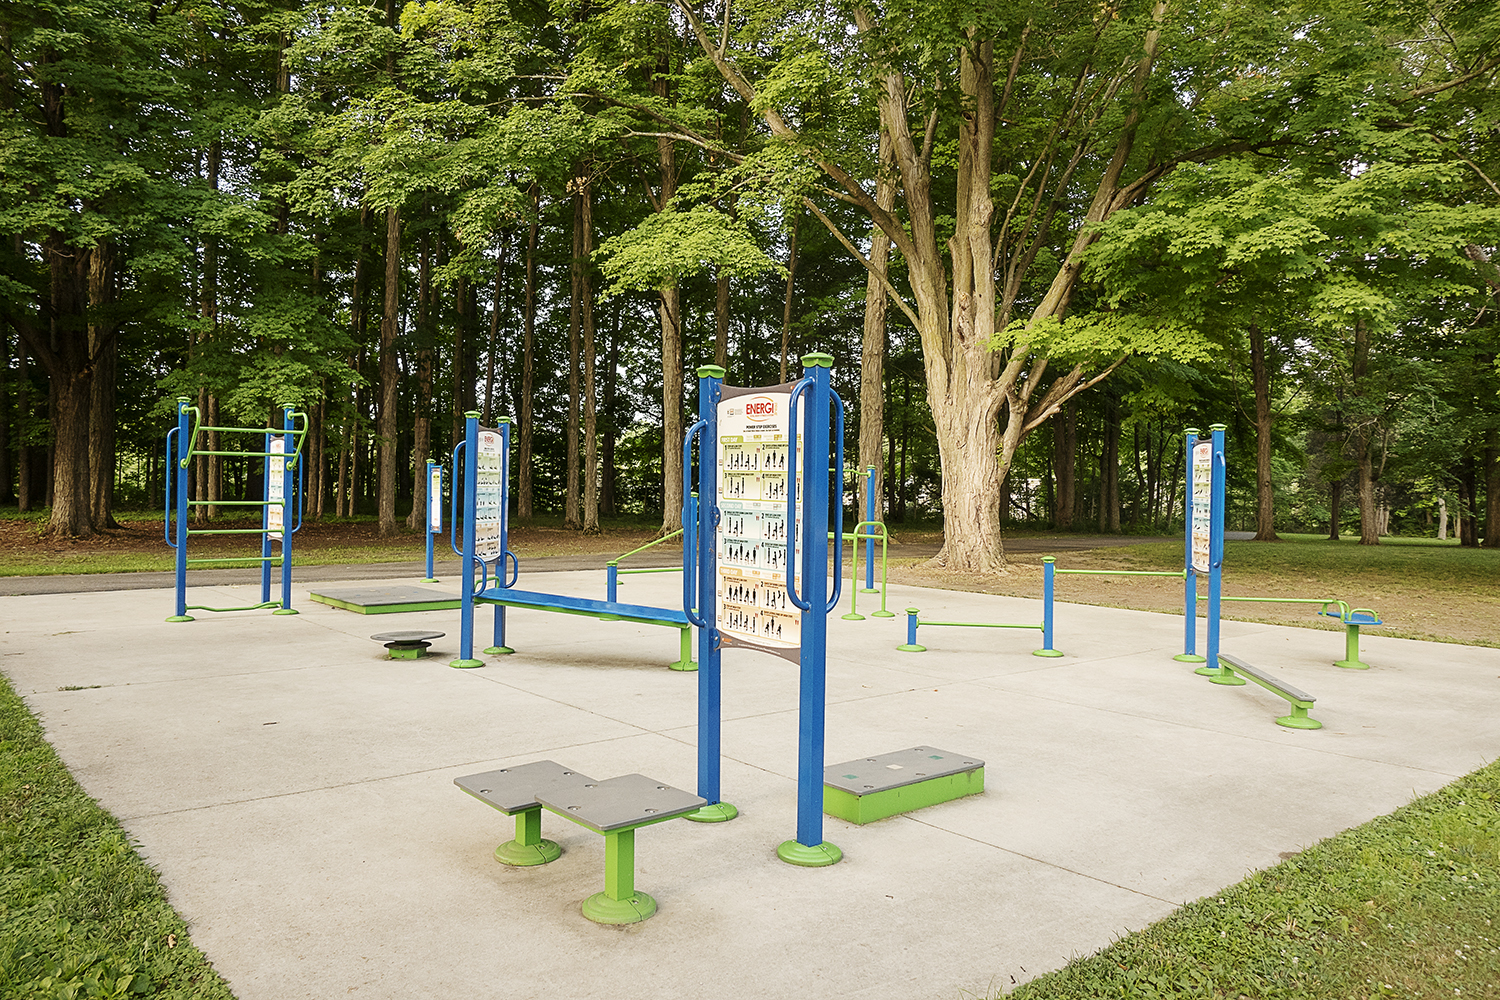 Flushing, MI - Monday, July 16, 2018: An exercise, bodyweight and fitness area at the Flushing County Park.